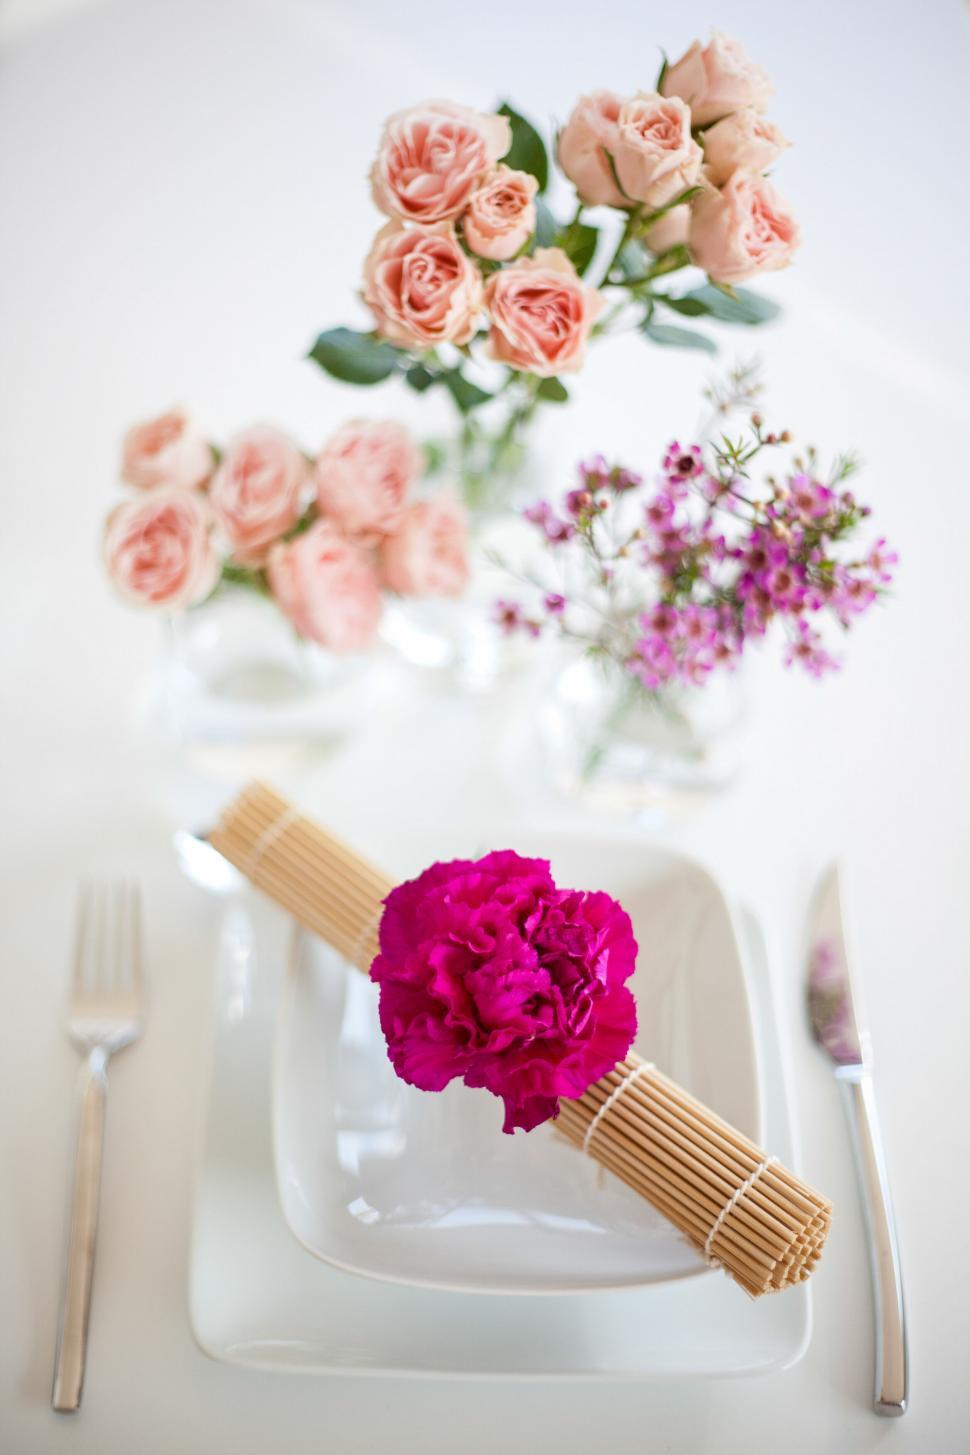 Free Image of Elegant table setting with flowers and pasta 